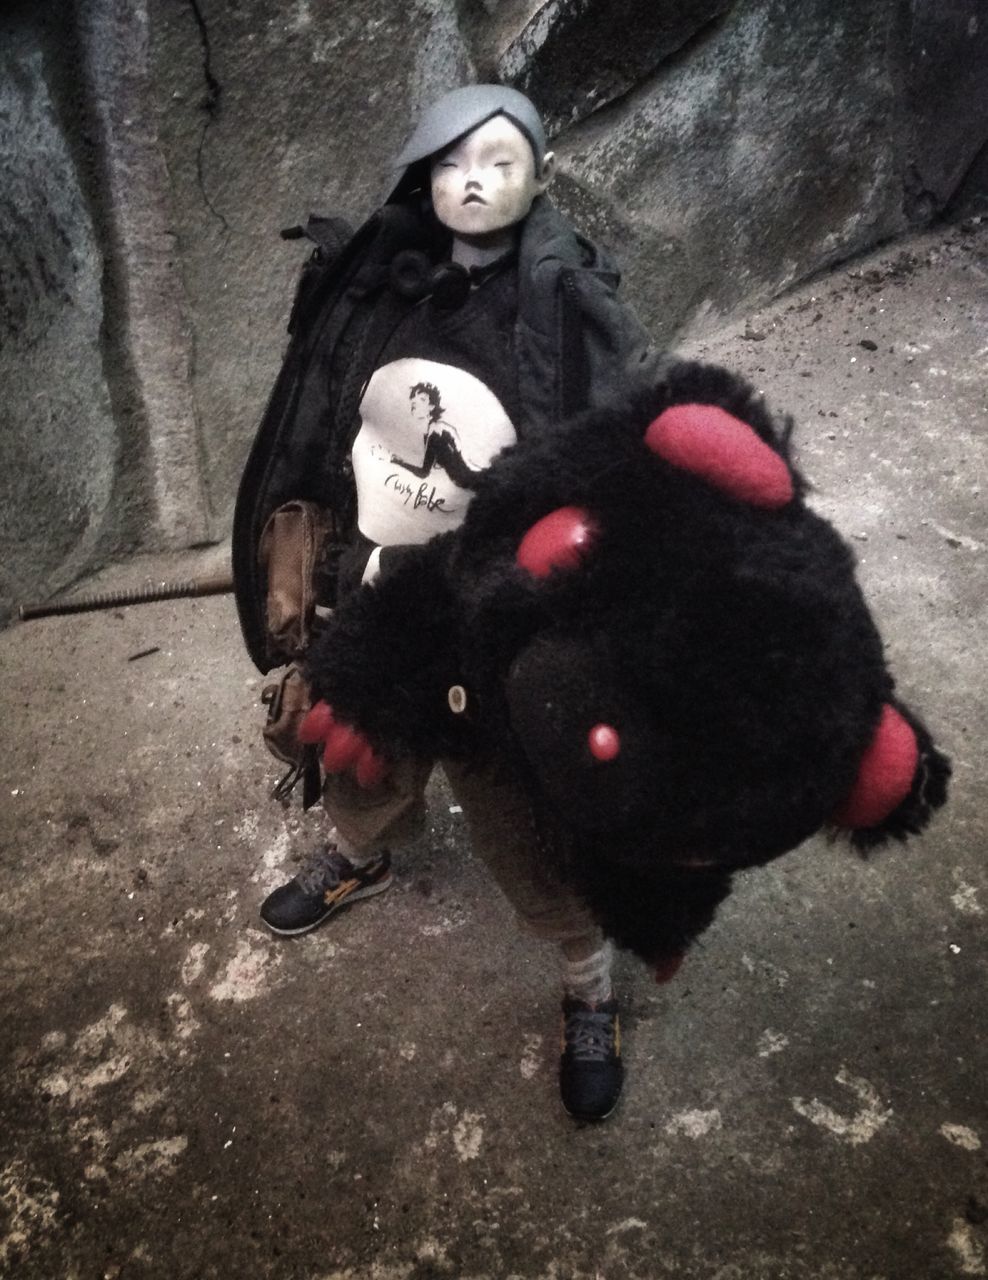 black, representation, toy, full length, childhood, one person, day, celebration, animal, outdoors, women, spooky, clothing, human representation, child, costume, nature, high angle view, adult, stuffed toy, female